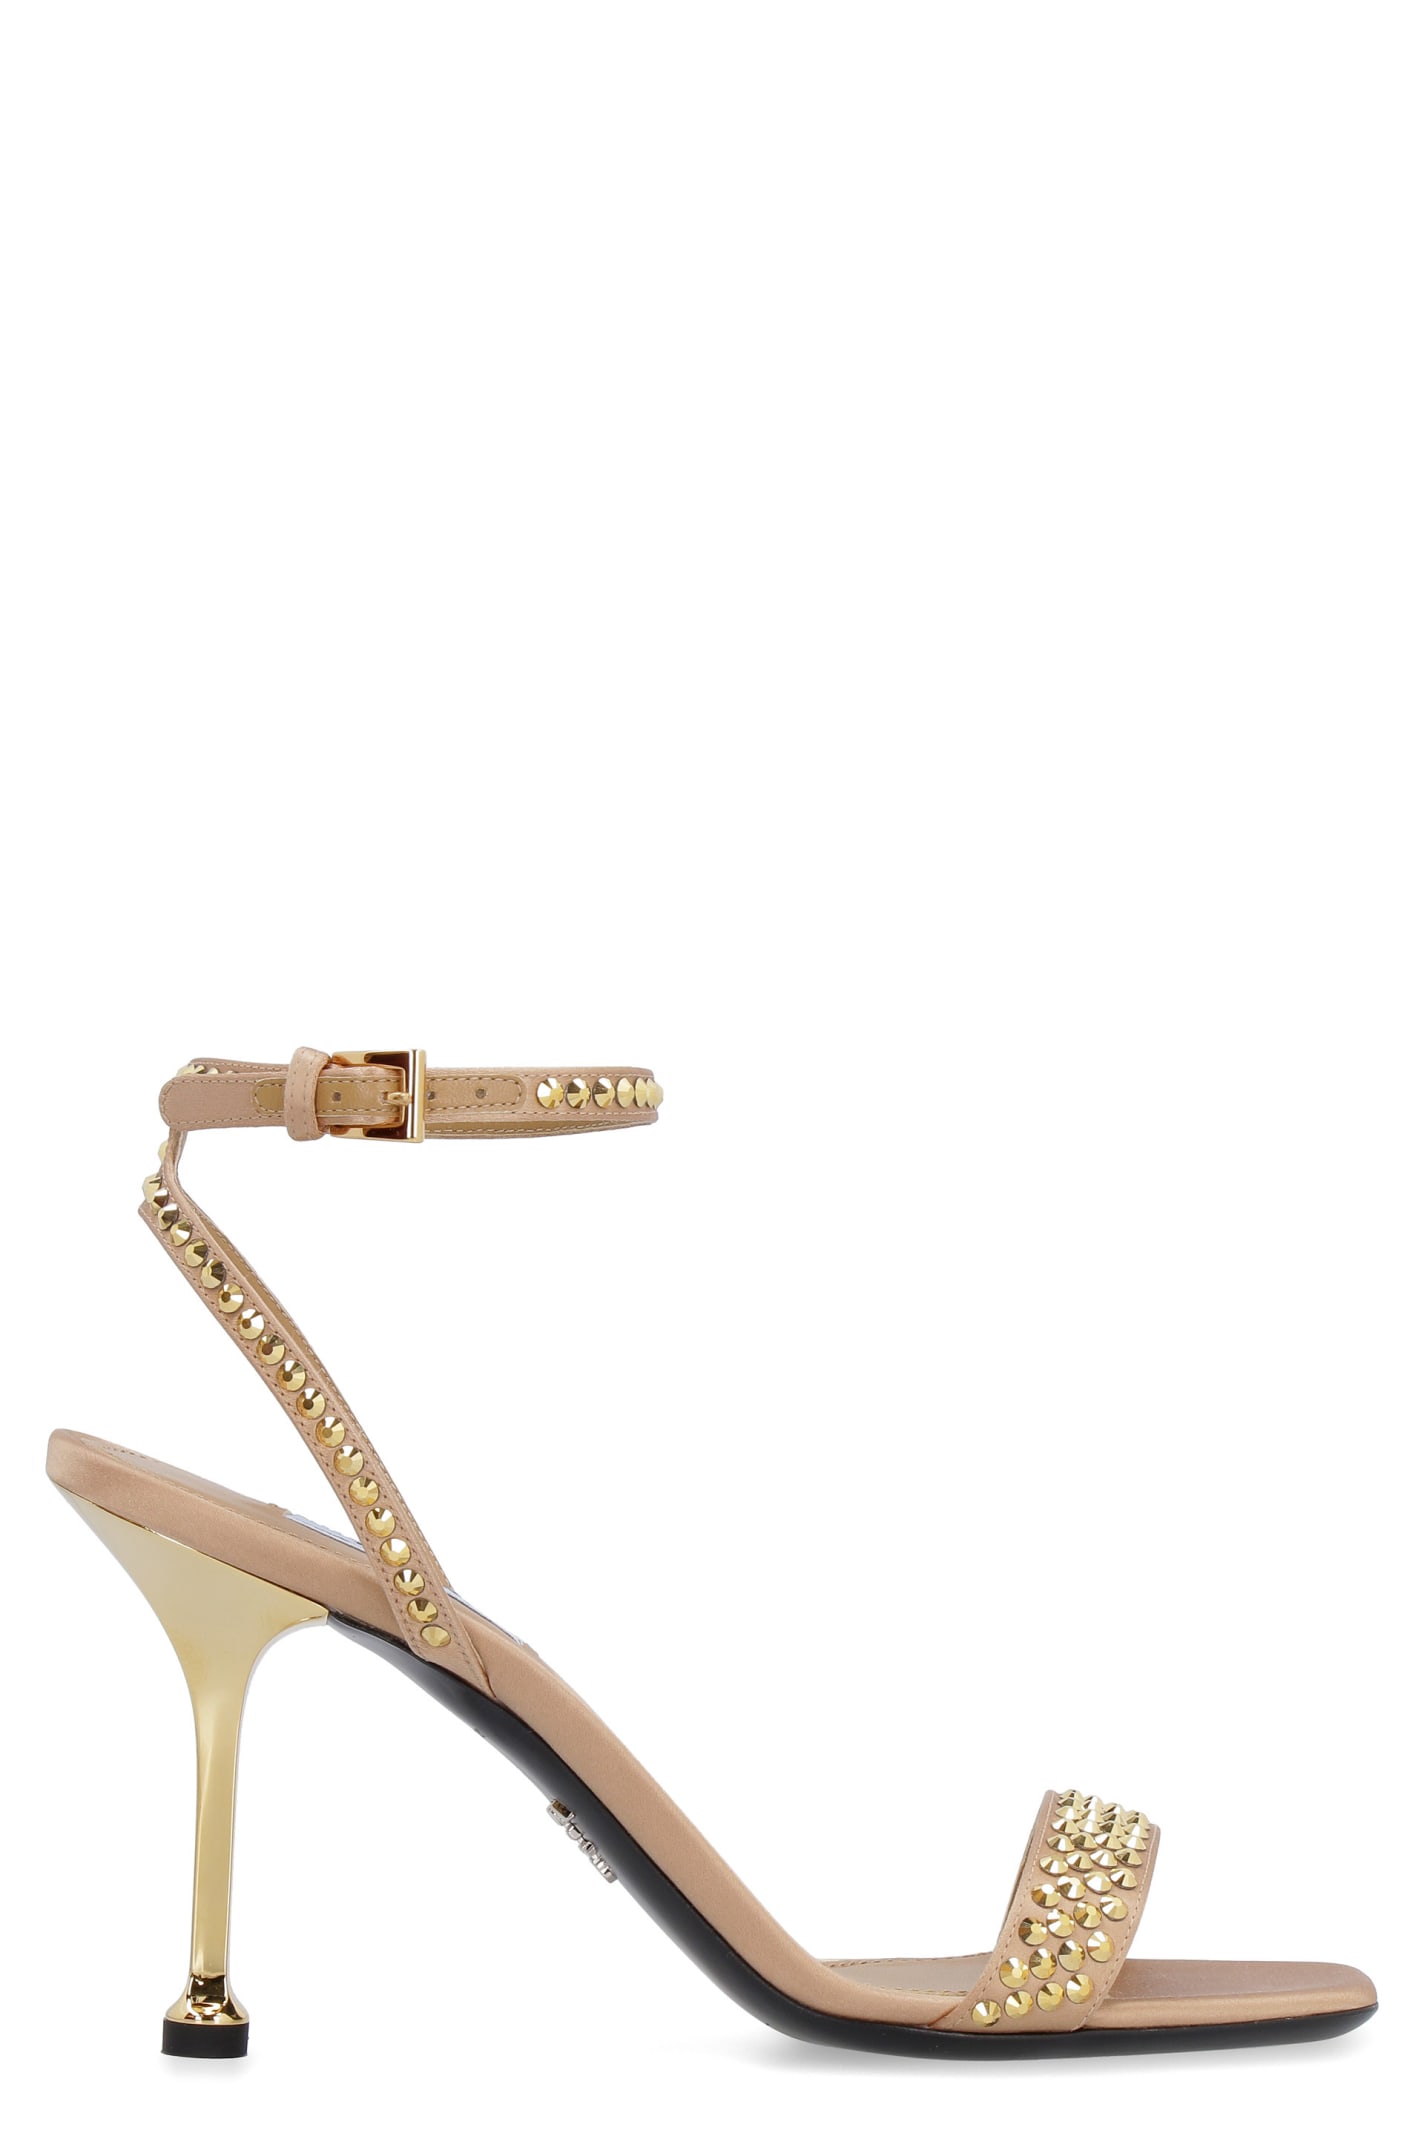 Buy Prada Embellished Leather Sandals online, shop Prada shoes with free shipping